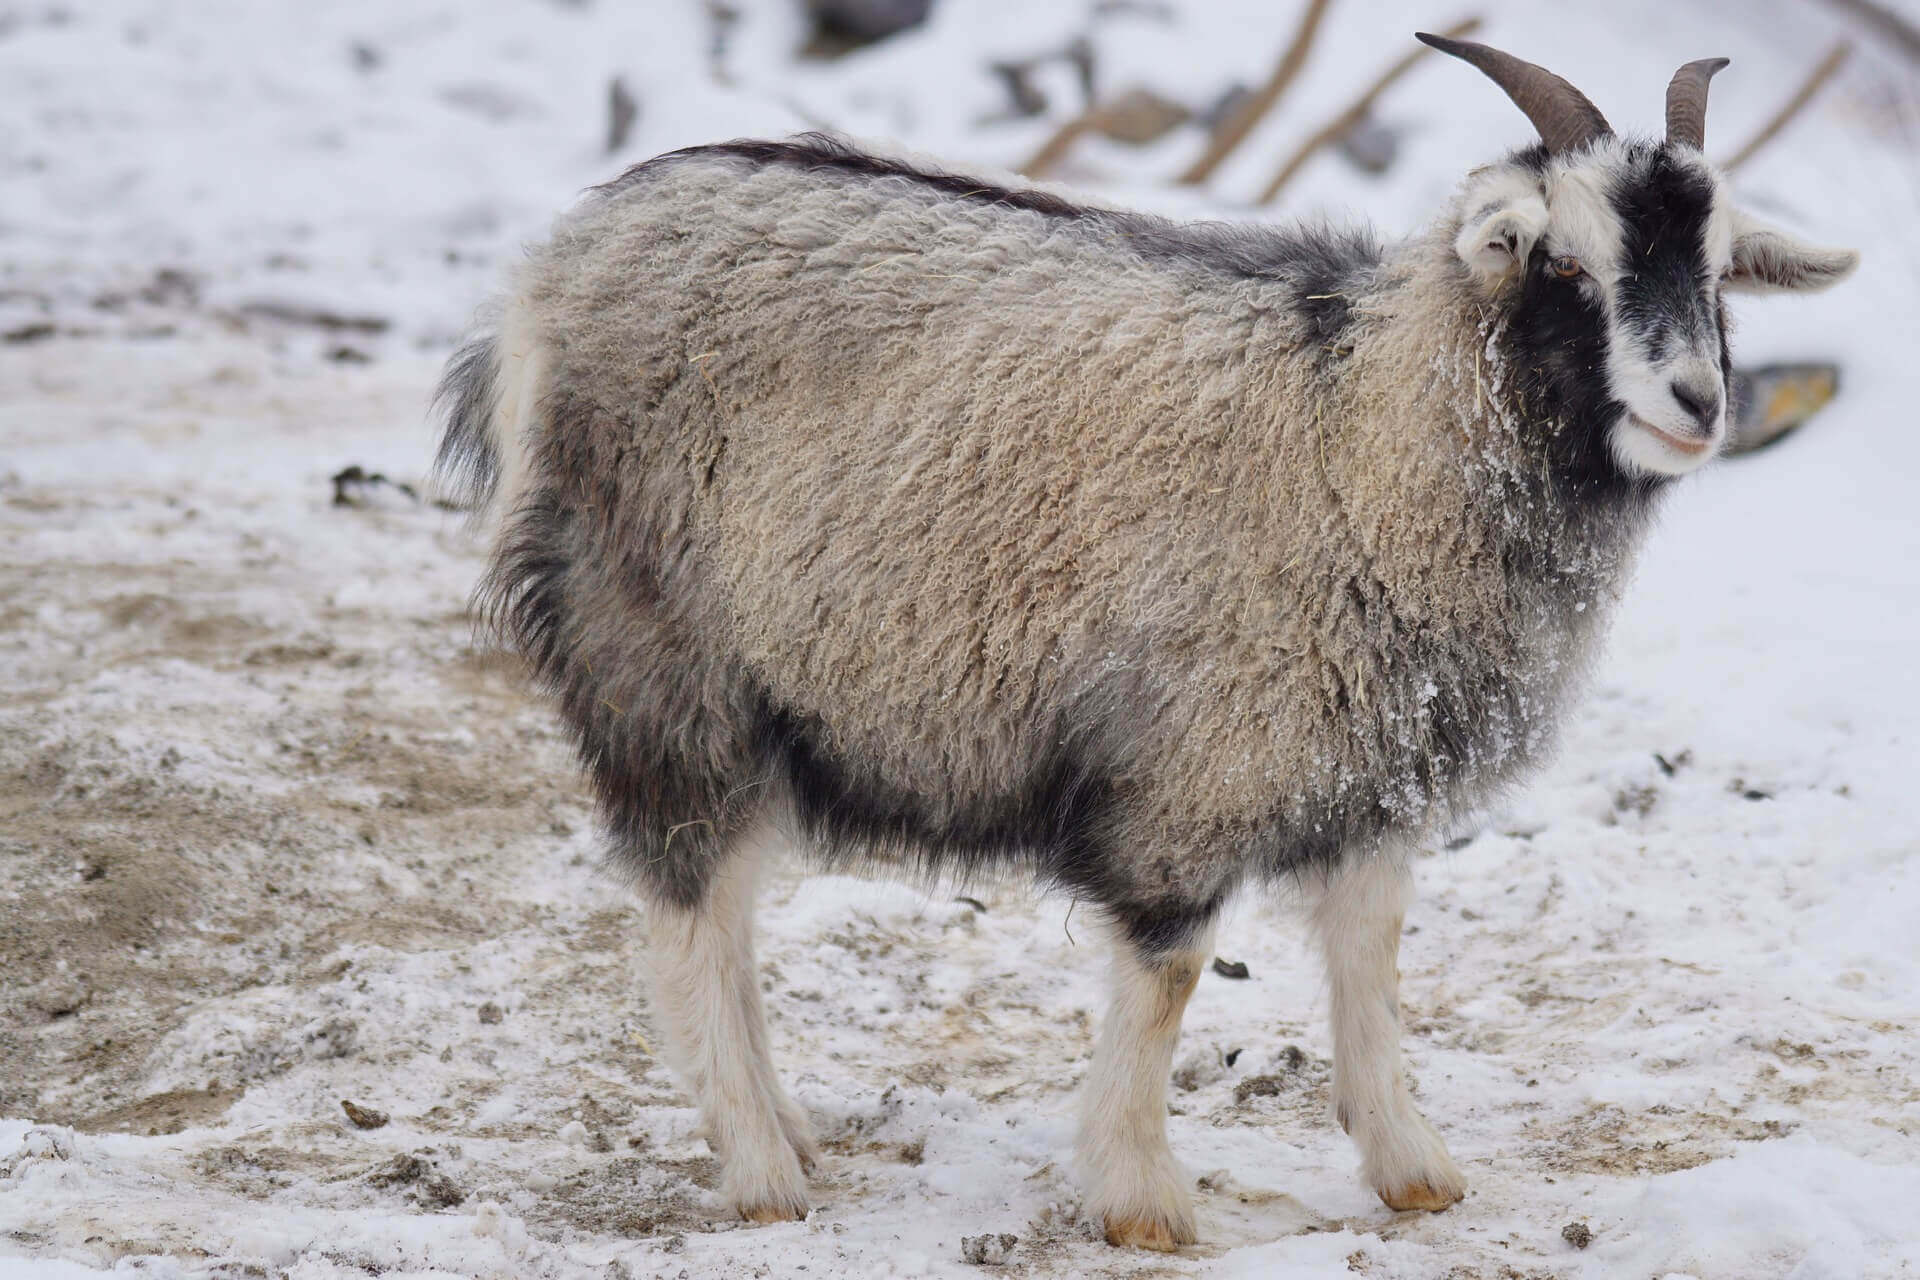 Image from Pixabay of a cashmere goat in the Himalayas